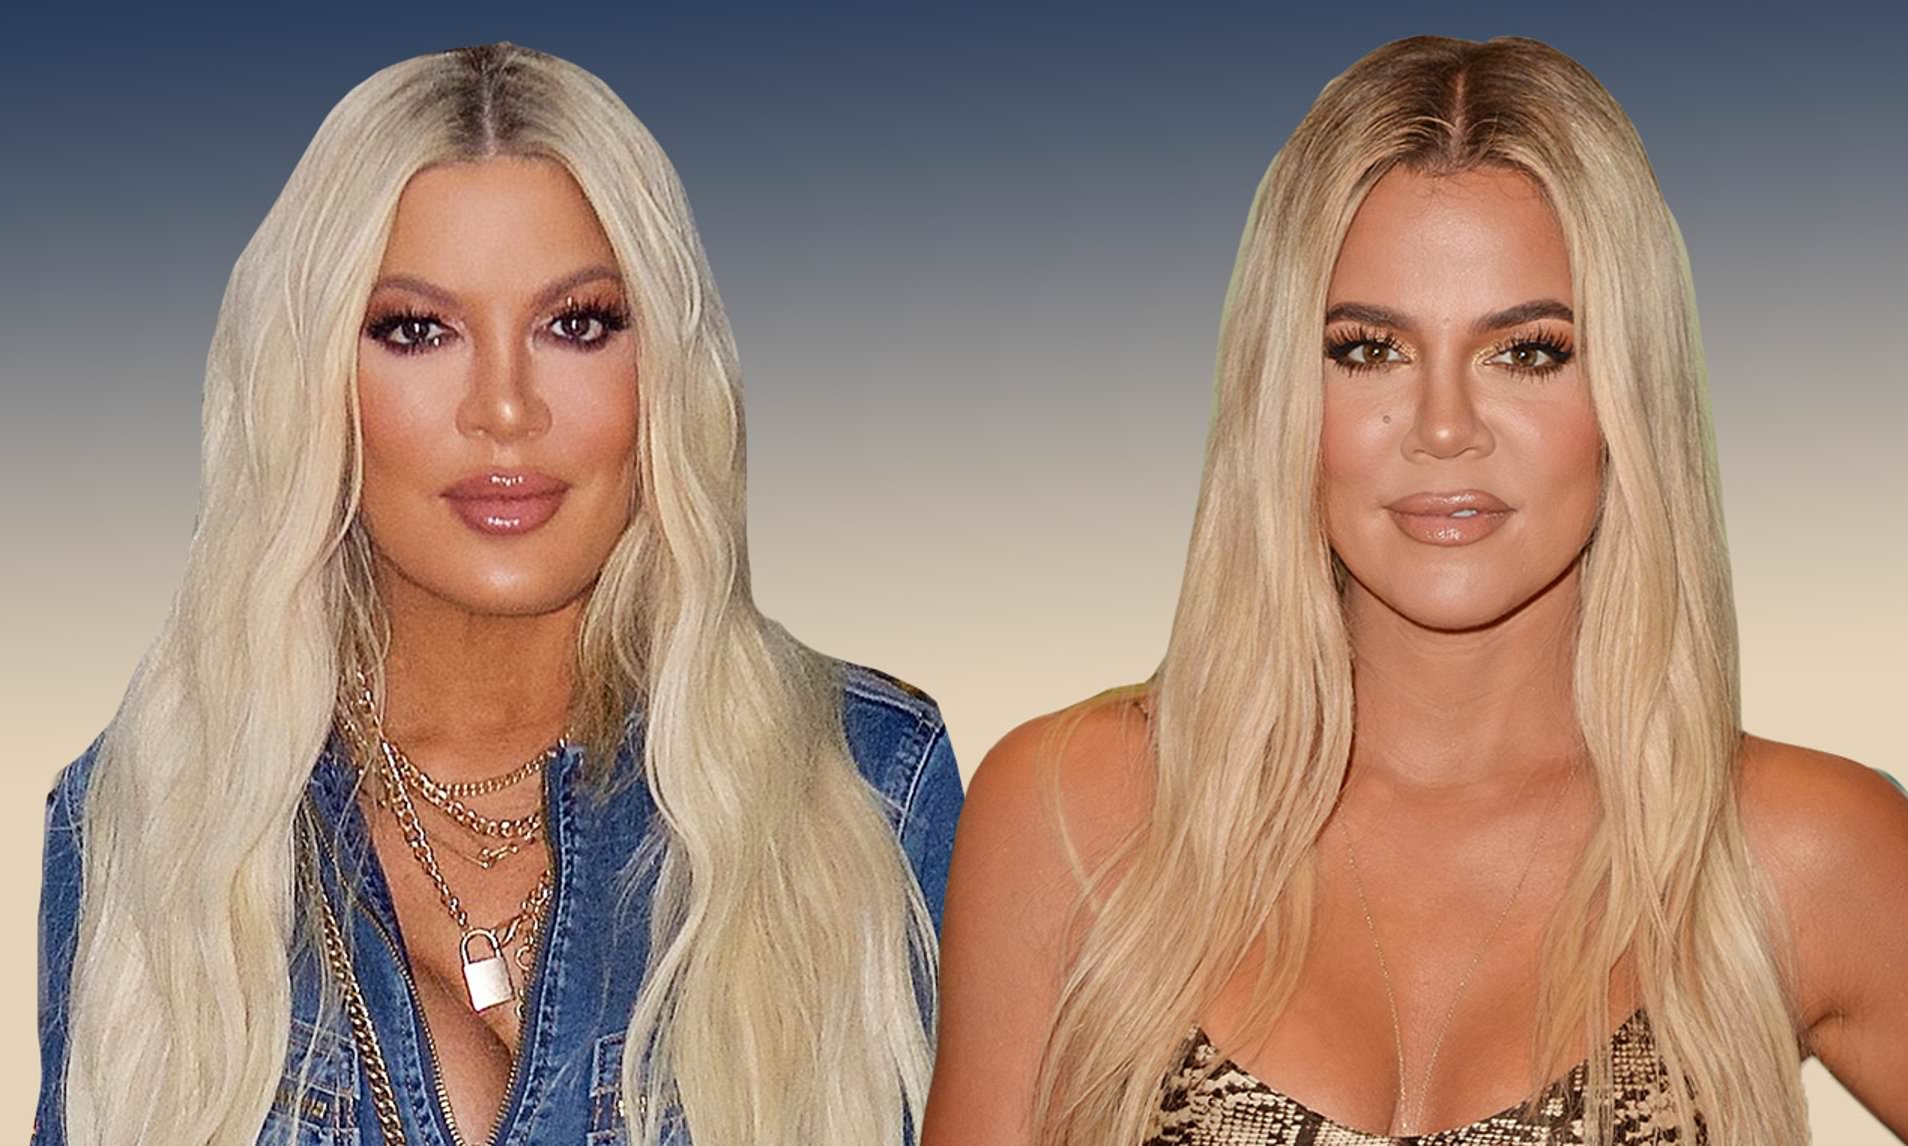 Khloe Kardashian and Tori Spelling Twins Separated At Birth? See photos